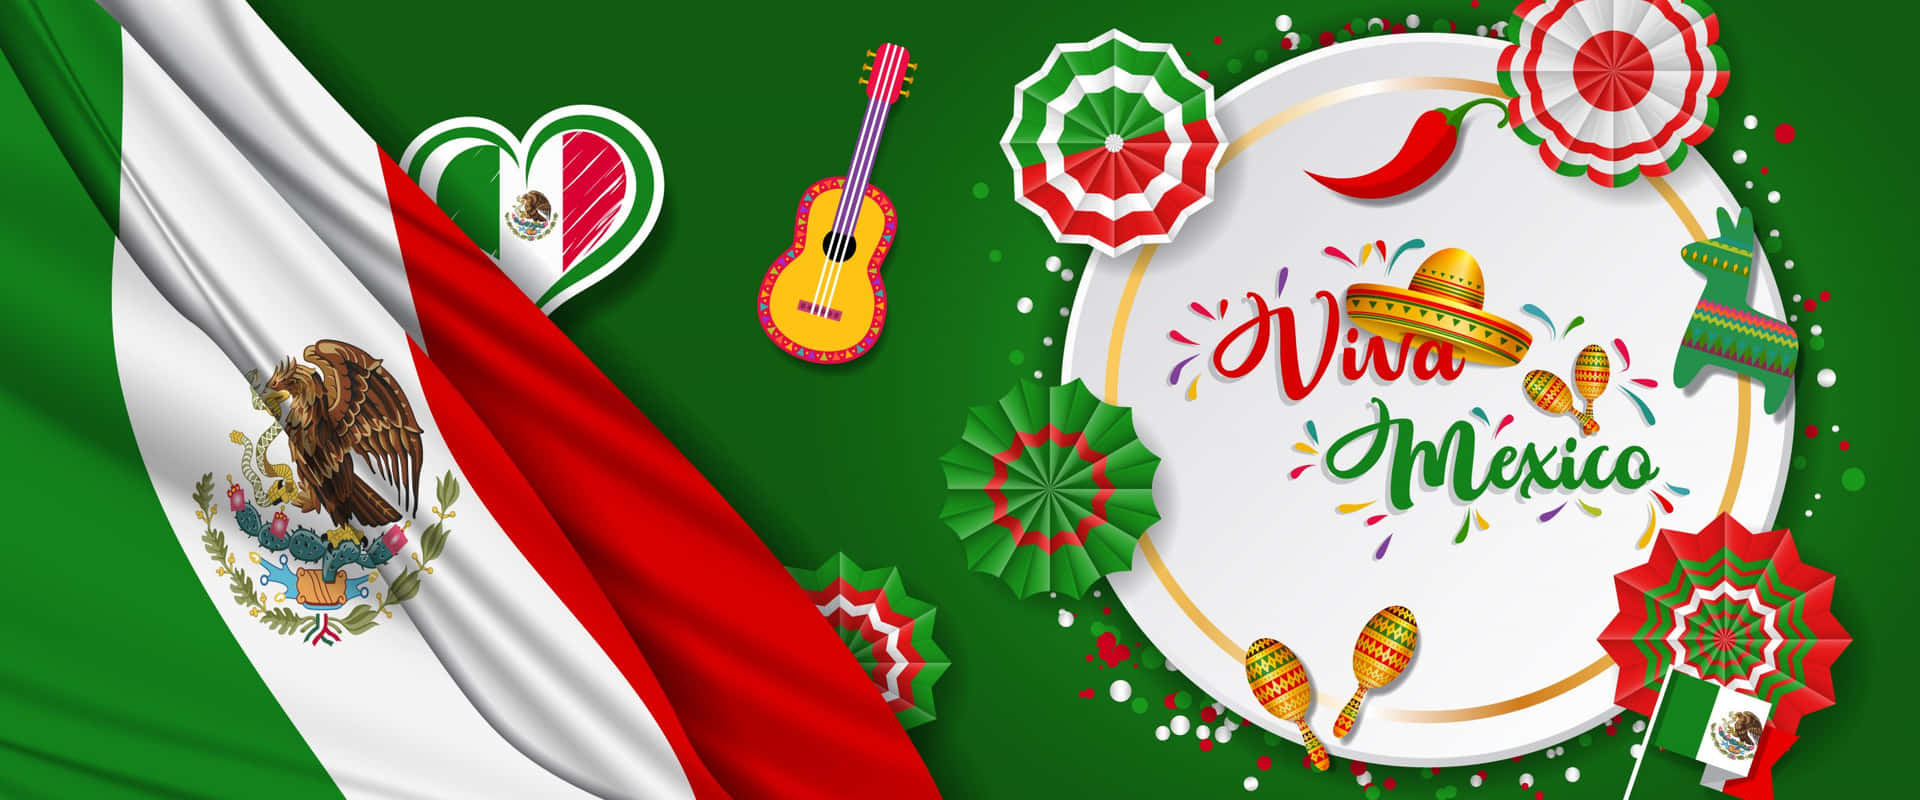 "Viva Mexico! Long live the rich culture and history of Mexico." Wallpaper